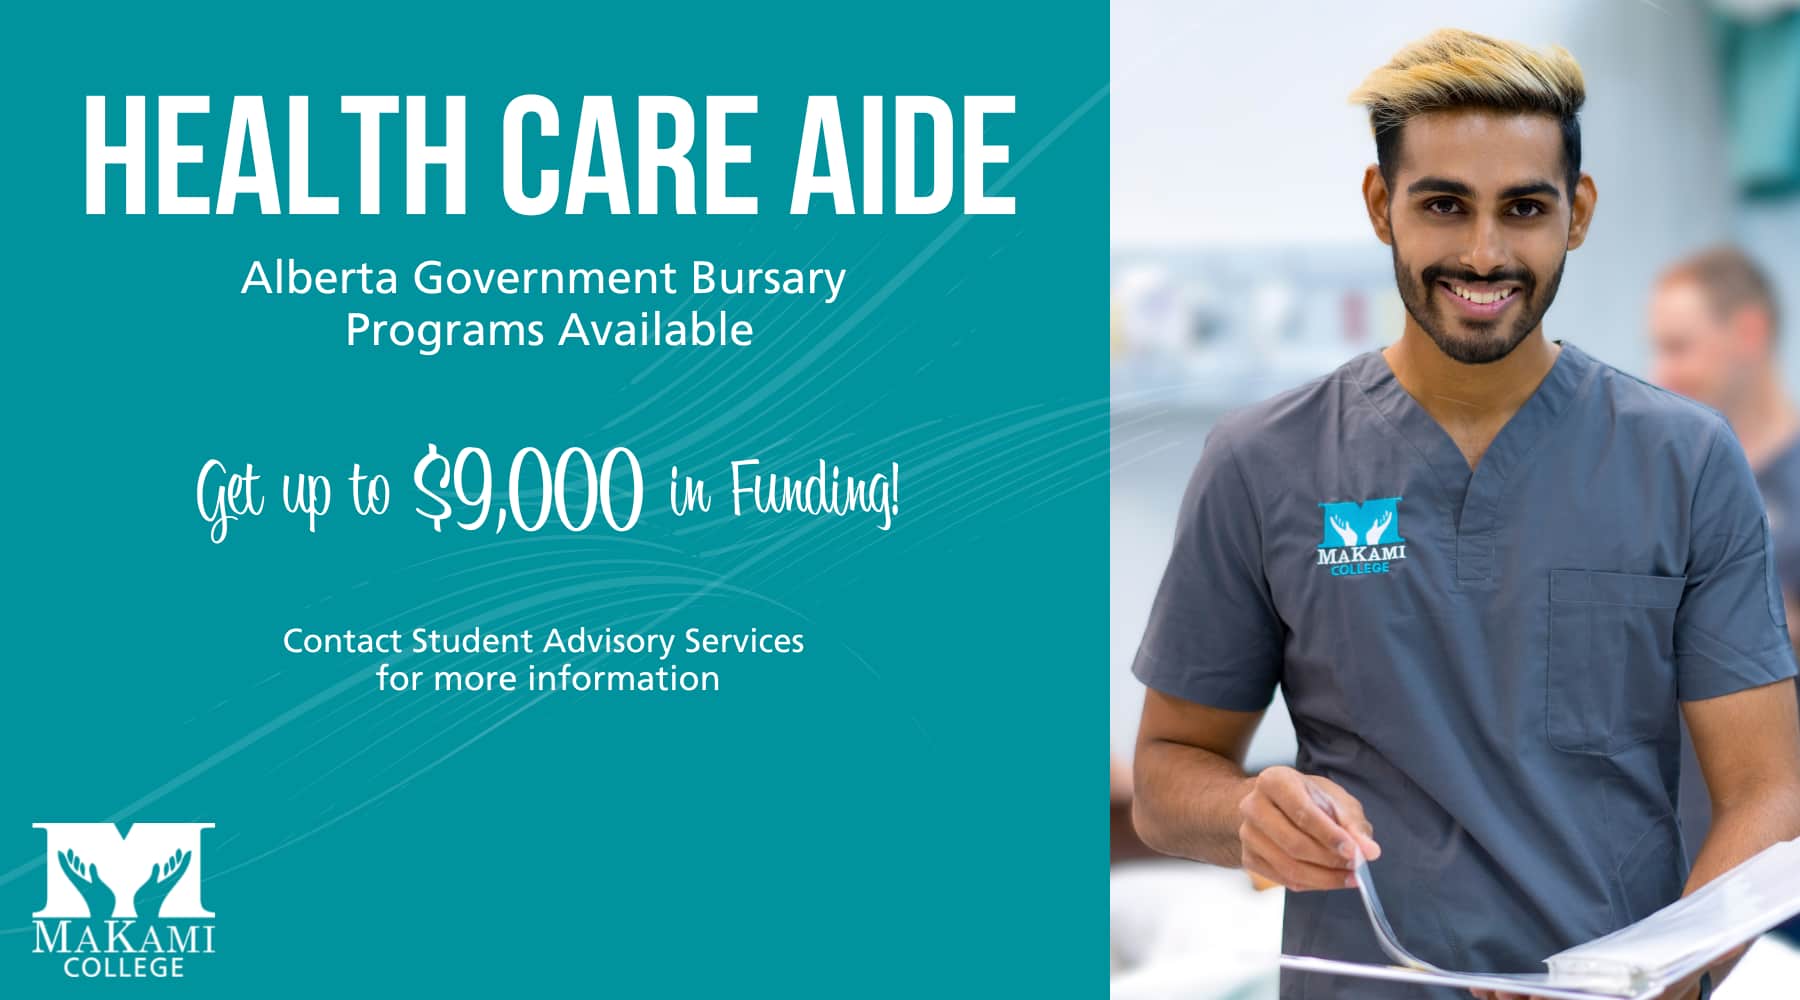 Health Care Aide Alberta Government Bursary programs available to get up to $9000 in funding at MaKami College by contacting student advisory services